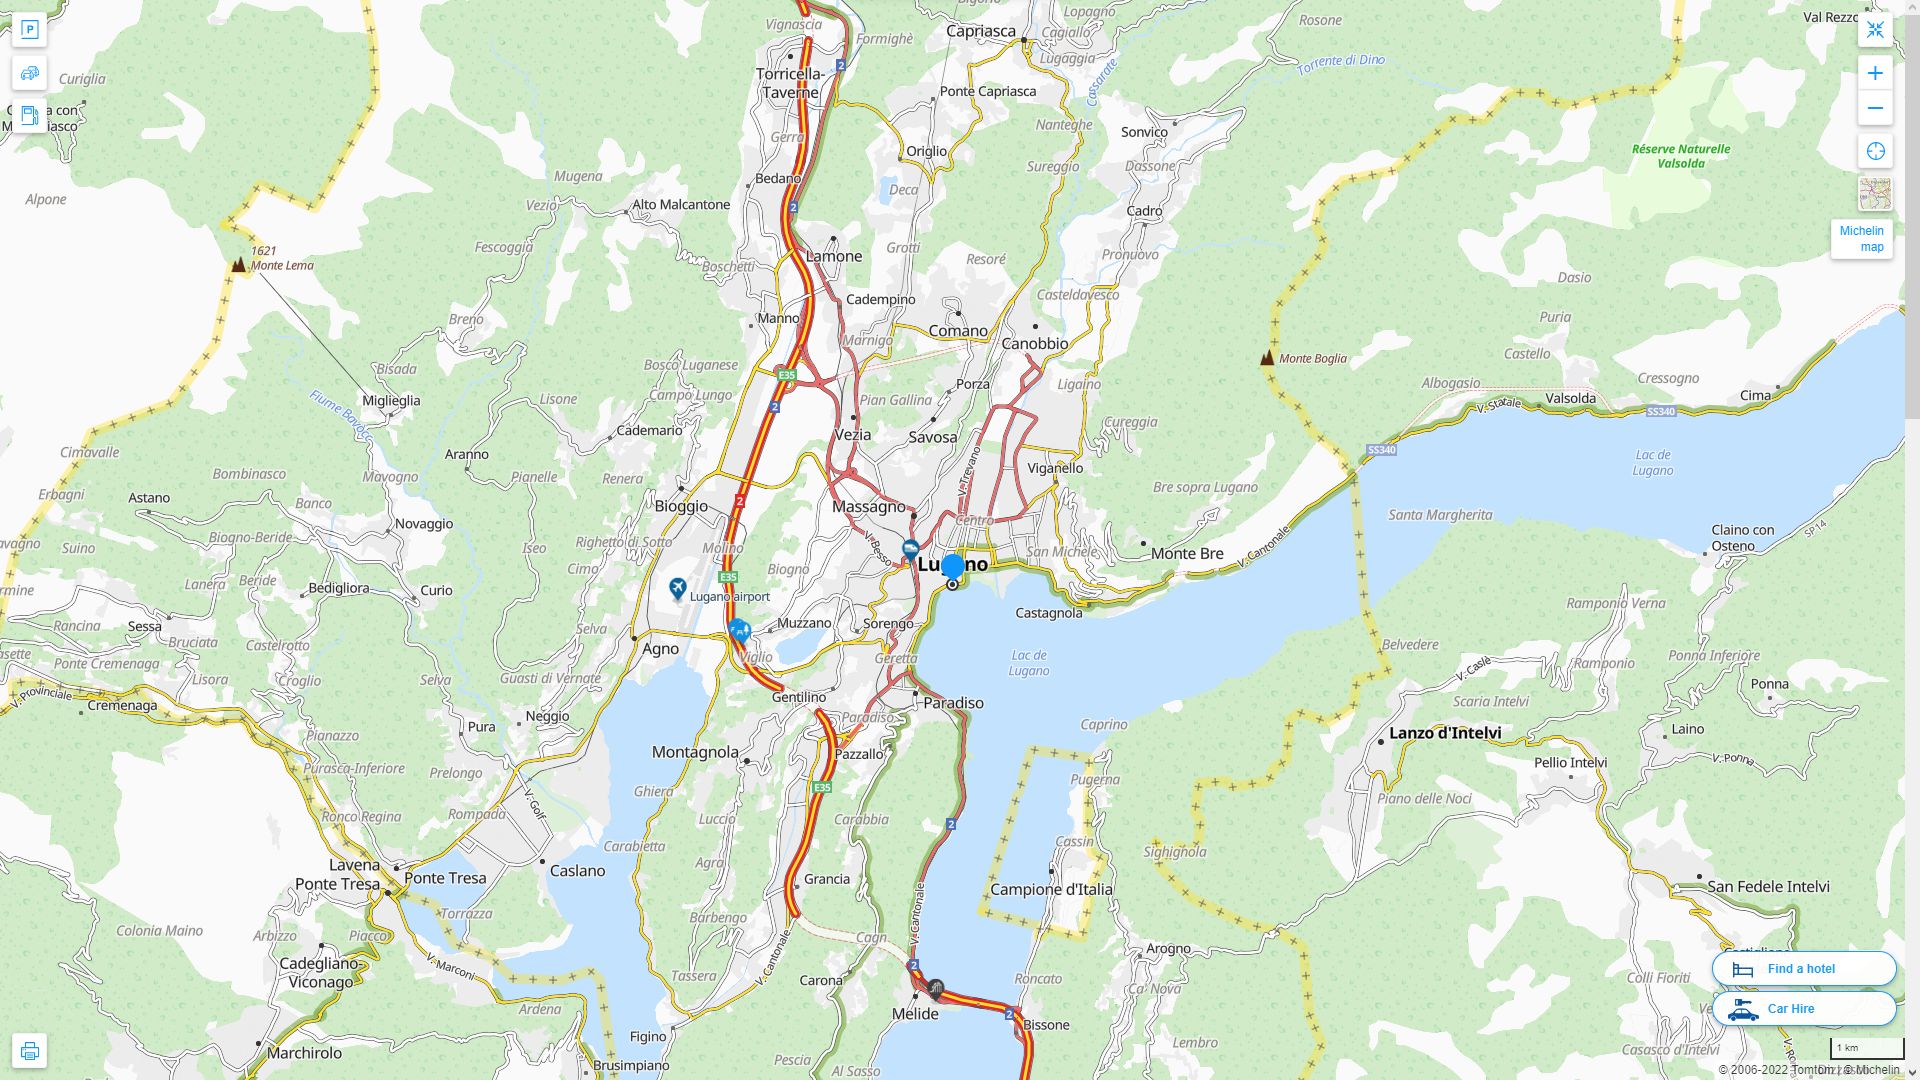 Lugano Highway and Road Map